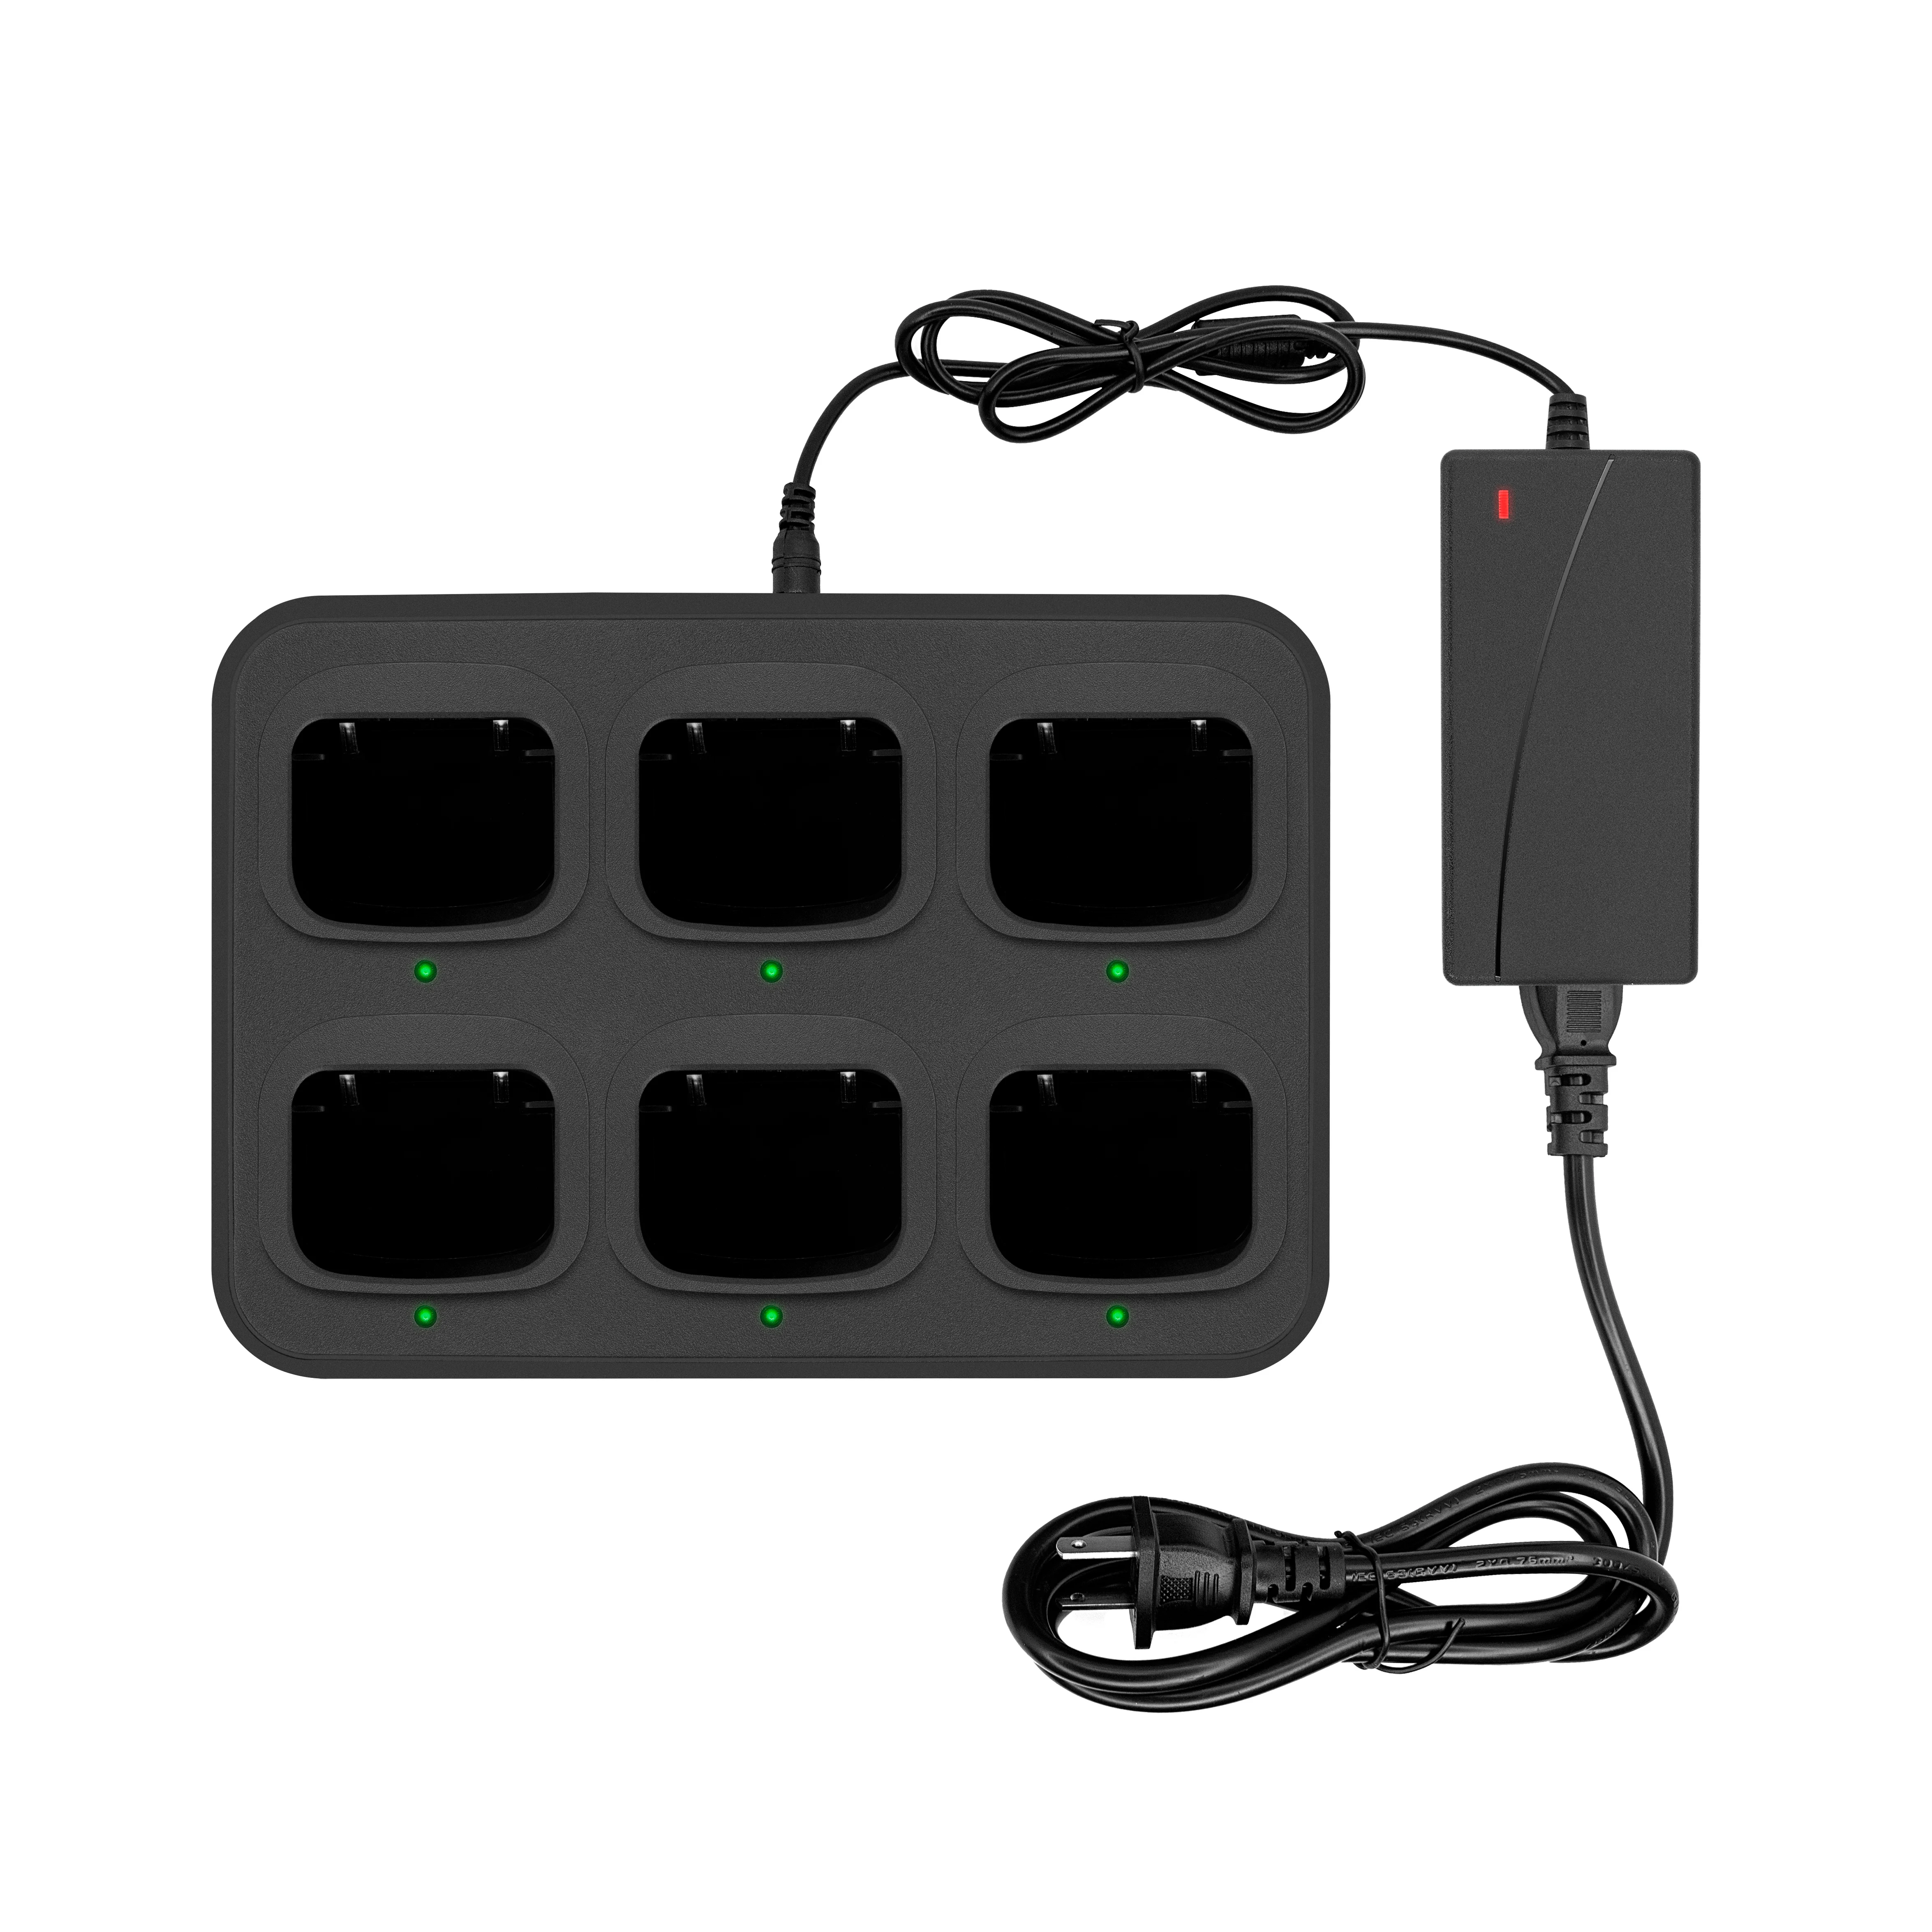 6-Way Multi-Functional Charger Adapter Rapid Charging for  MD-390 MD-398 MD-368 MD-580 Walkie Talkie Two Way Radio